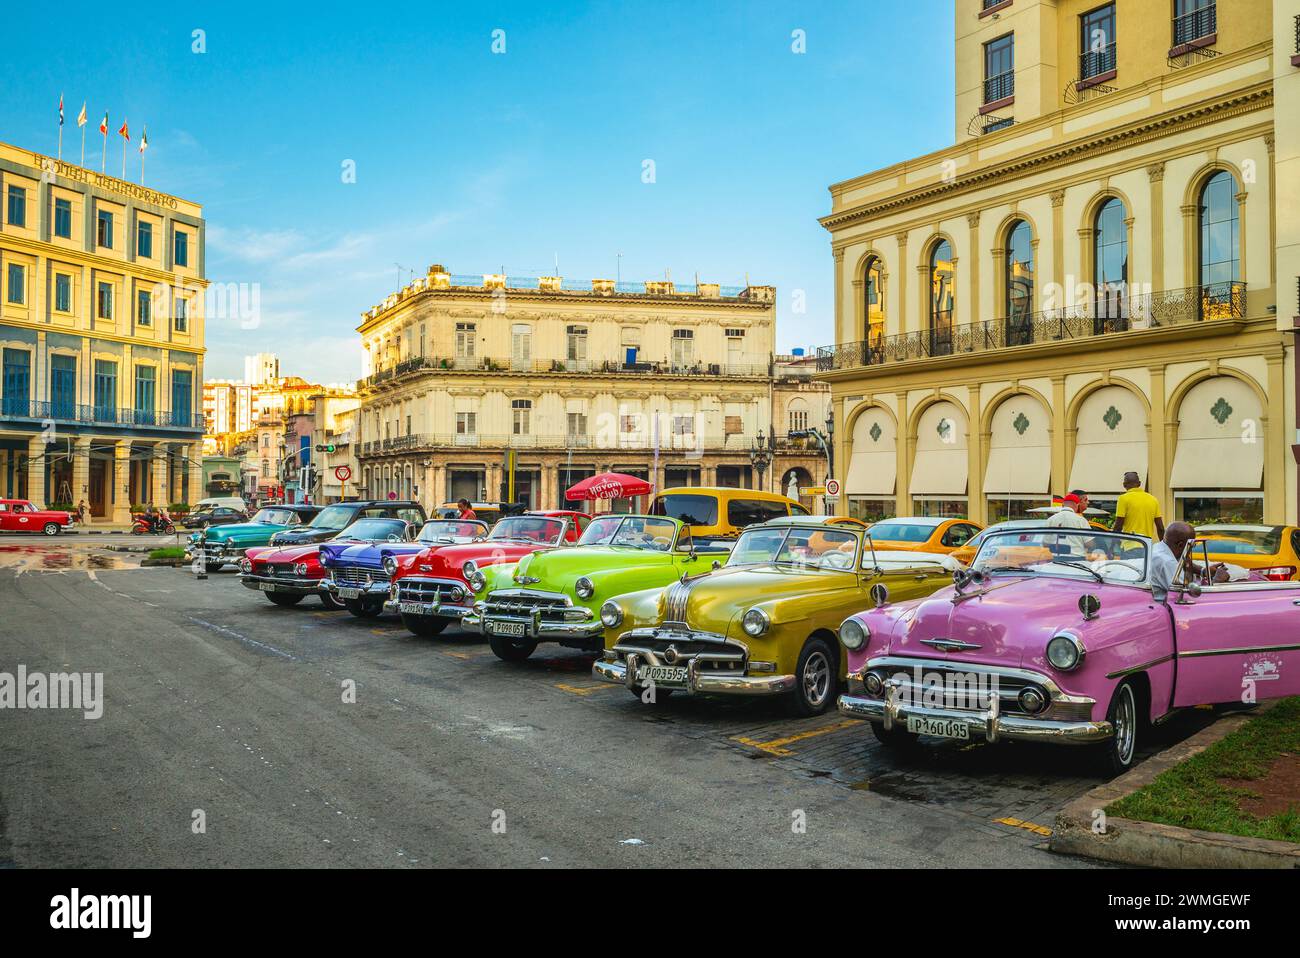 October 28, 2019: colorful vintage classic cars parked on the street in havana, cuba. These retro cars are a national icon and a significant component Stock Photo